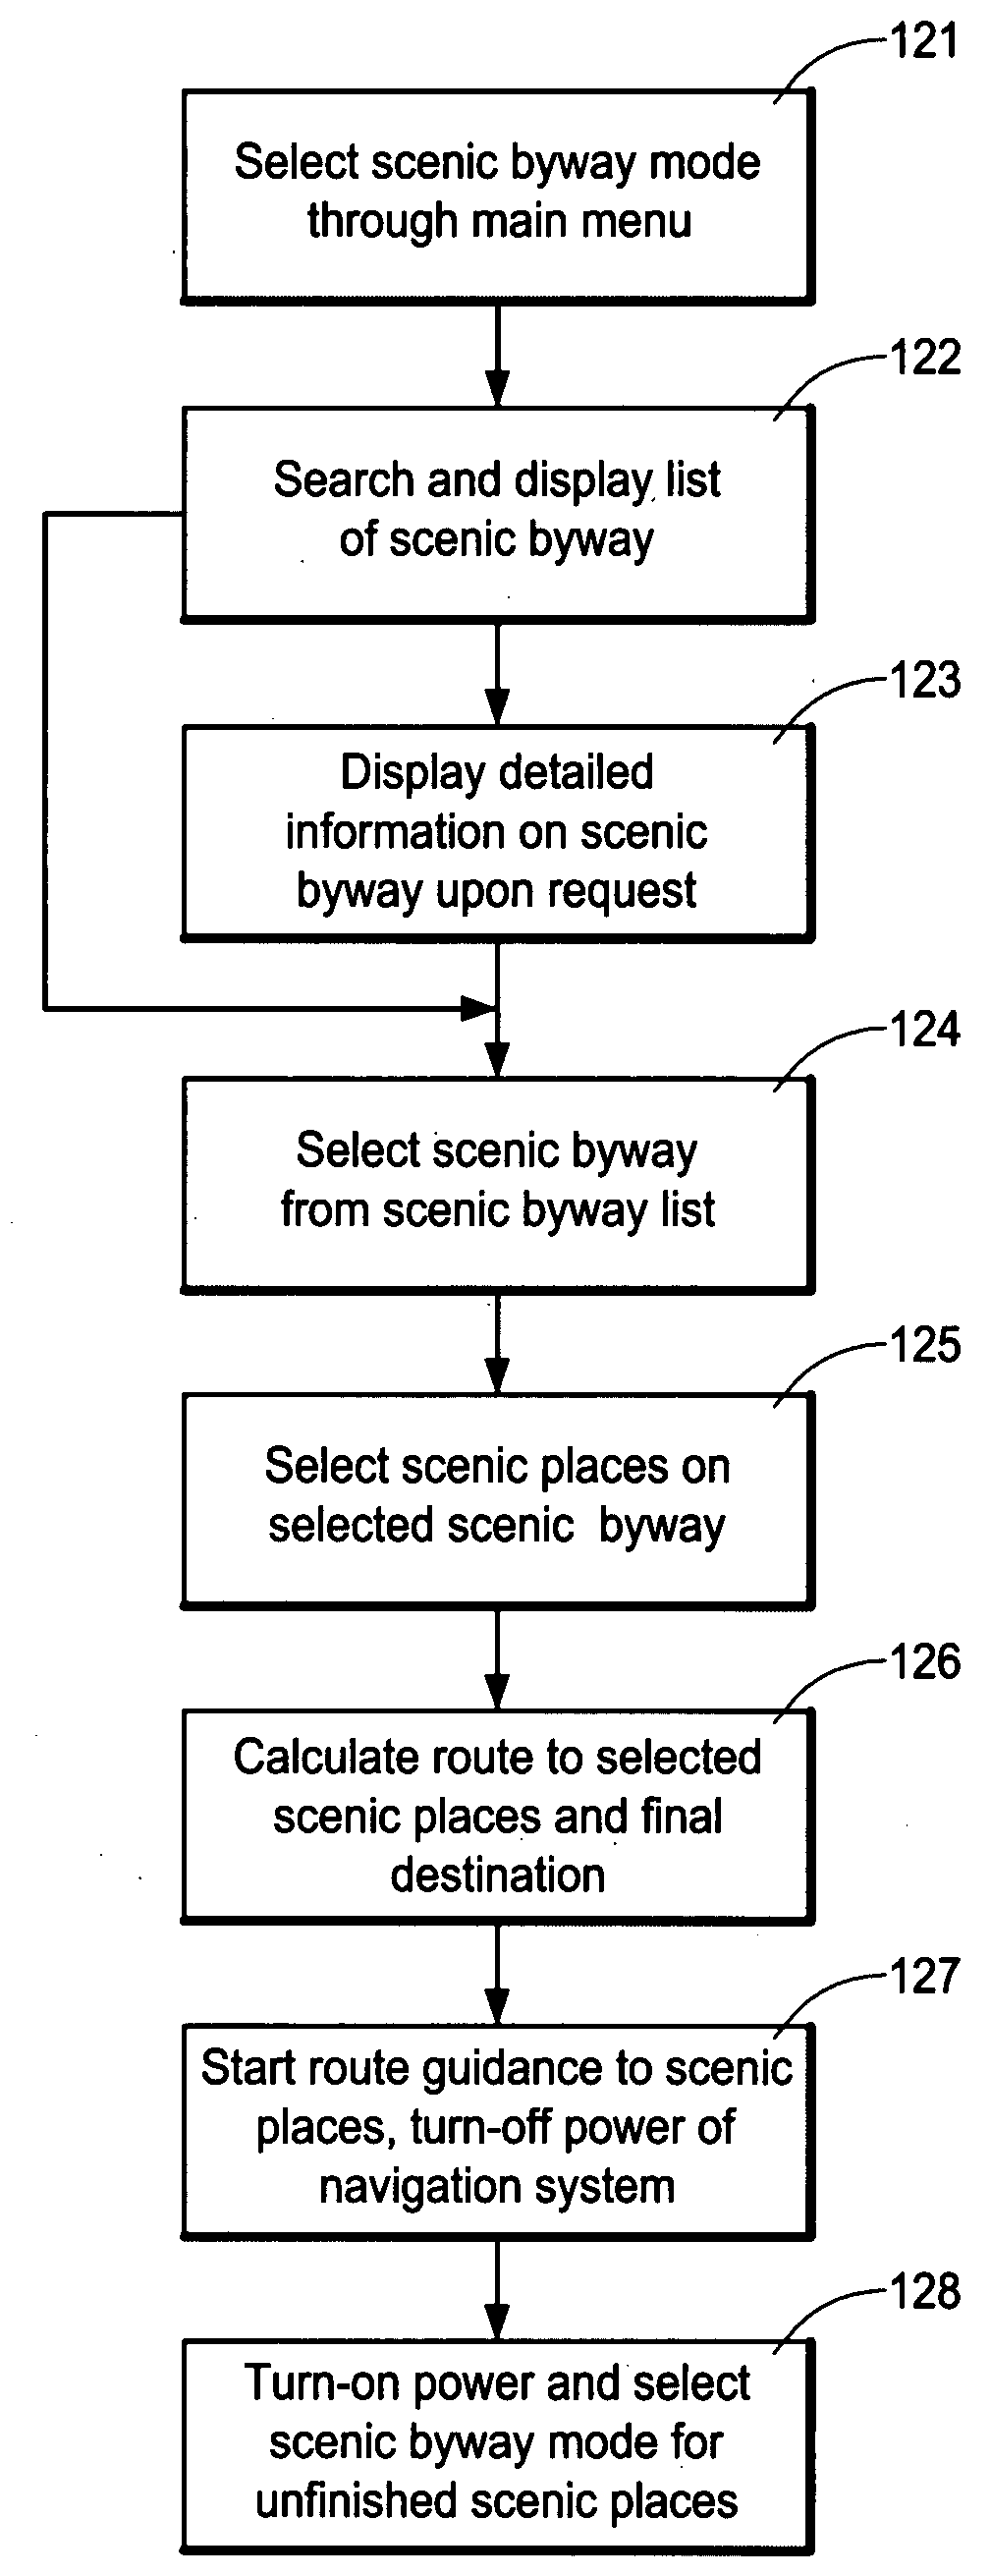 Navigation method and system for selecting and visiting scenic places on selected scenic byway